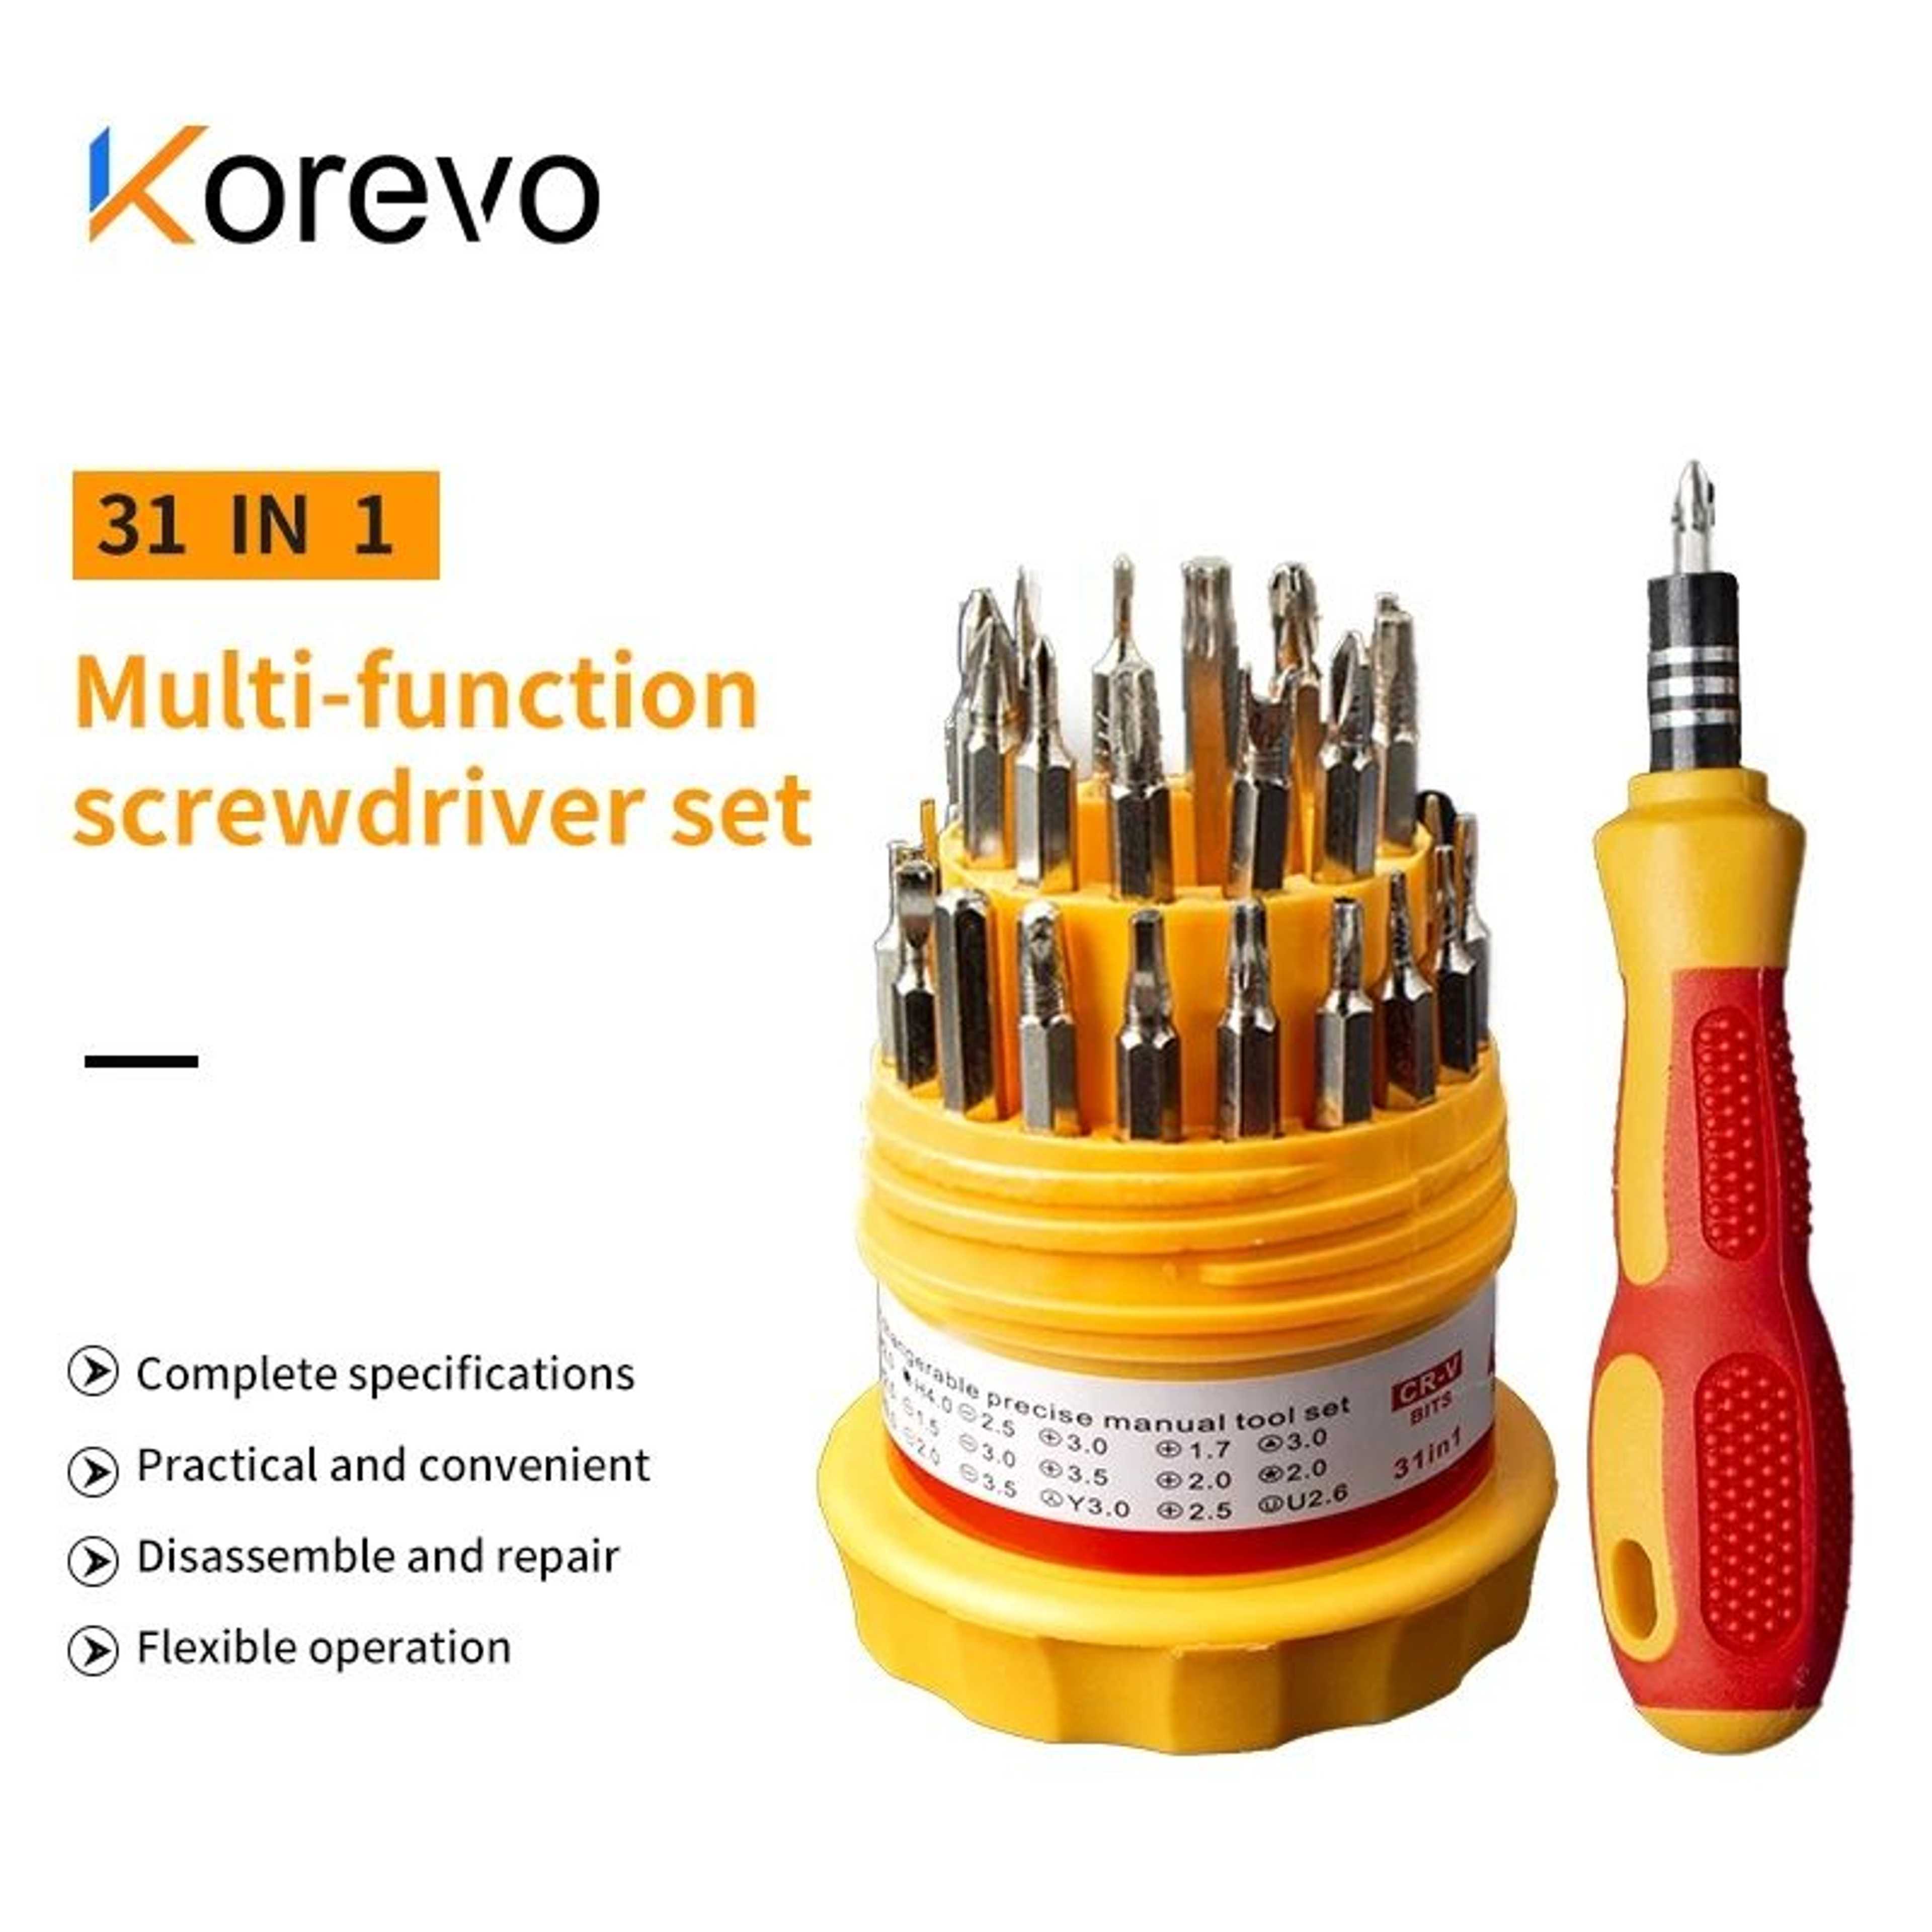 31 in 1 Multifunctional Batch of Head Screwdriver Small Set Best for Opening Laptops and other Electronic Devices